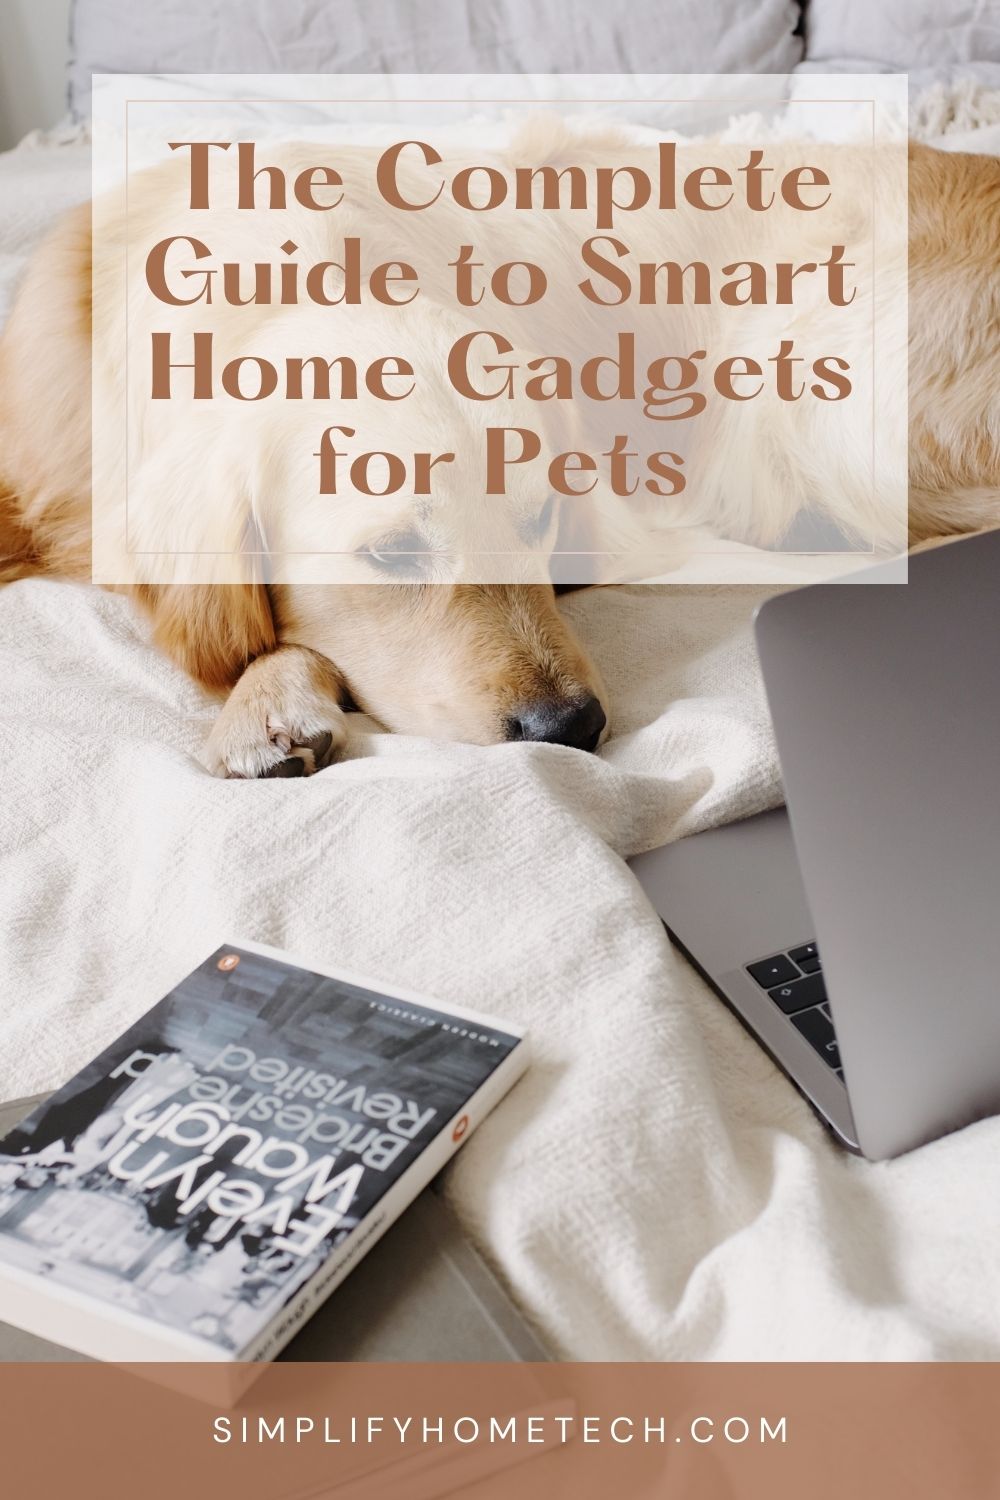 The Complete Guide to Smart Home Gadgets for Pets